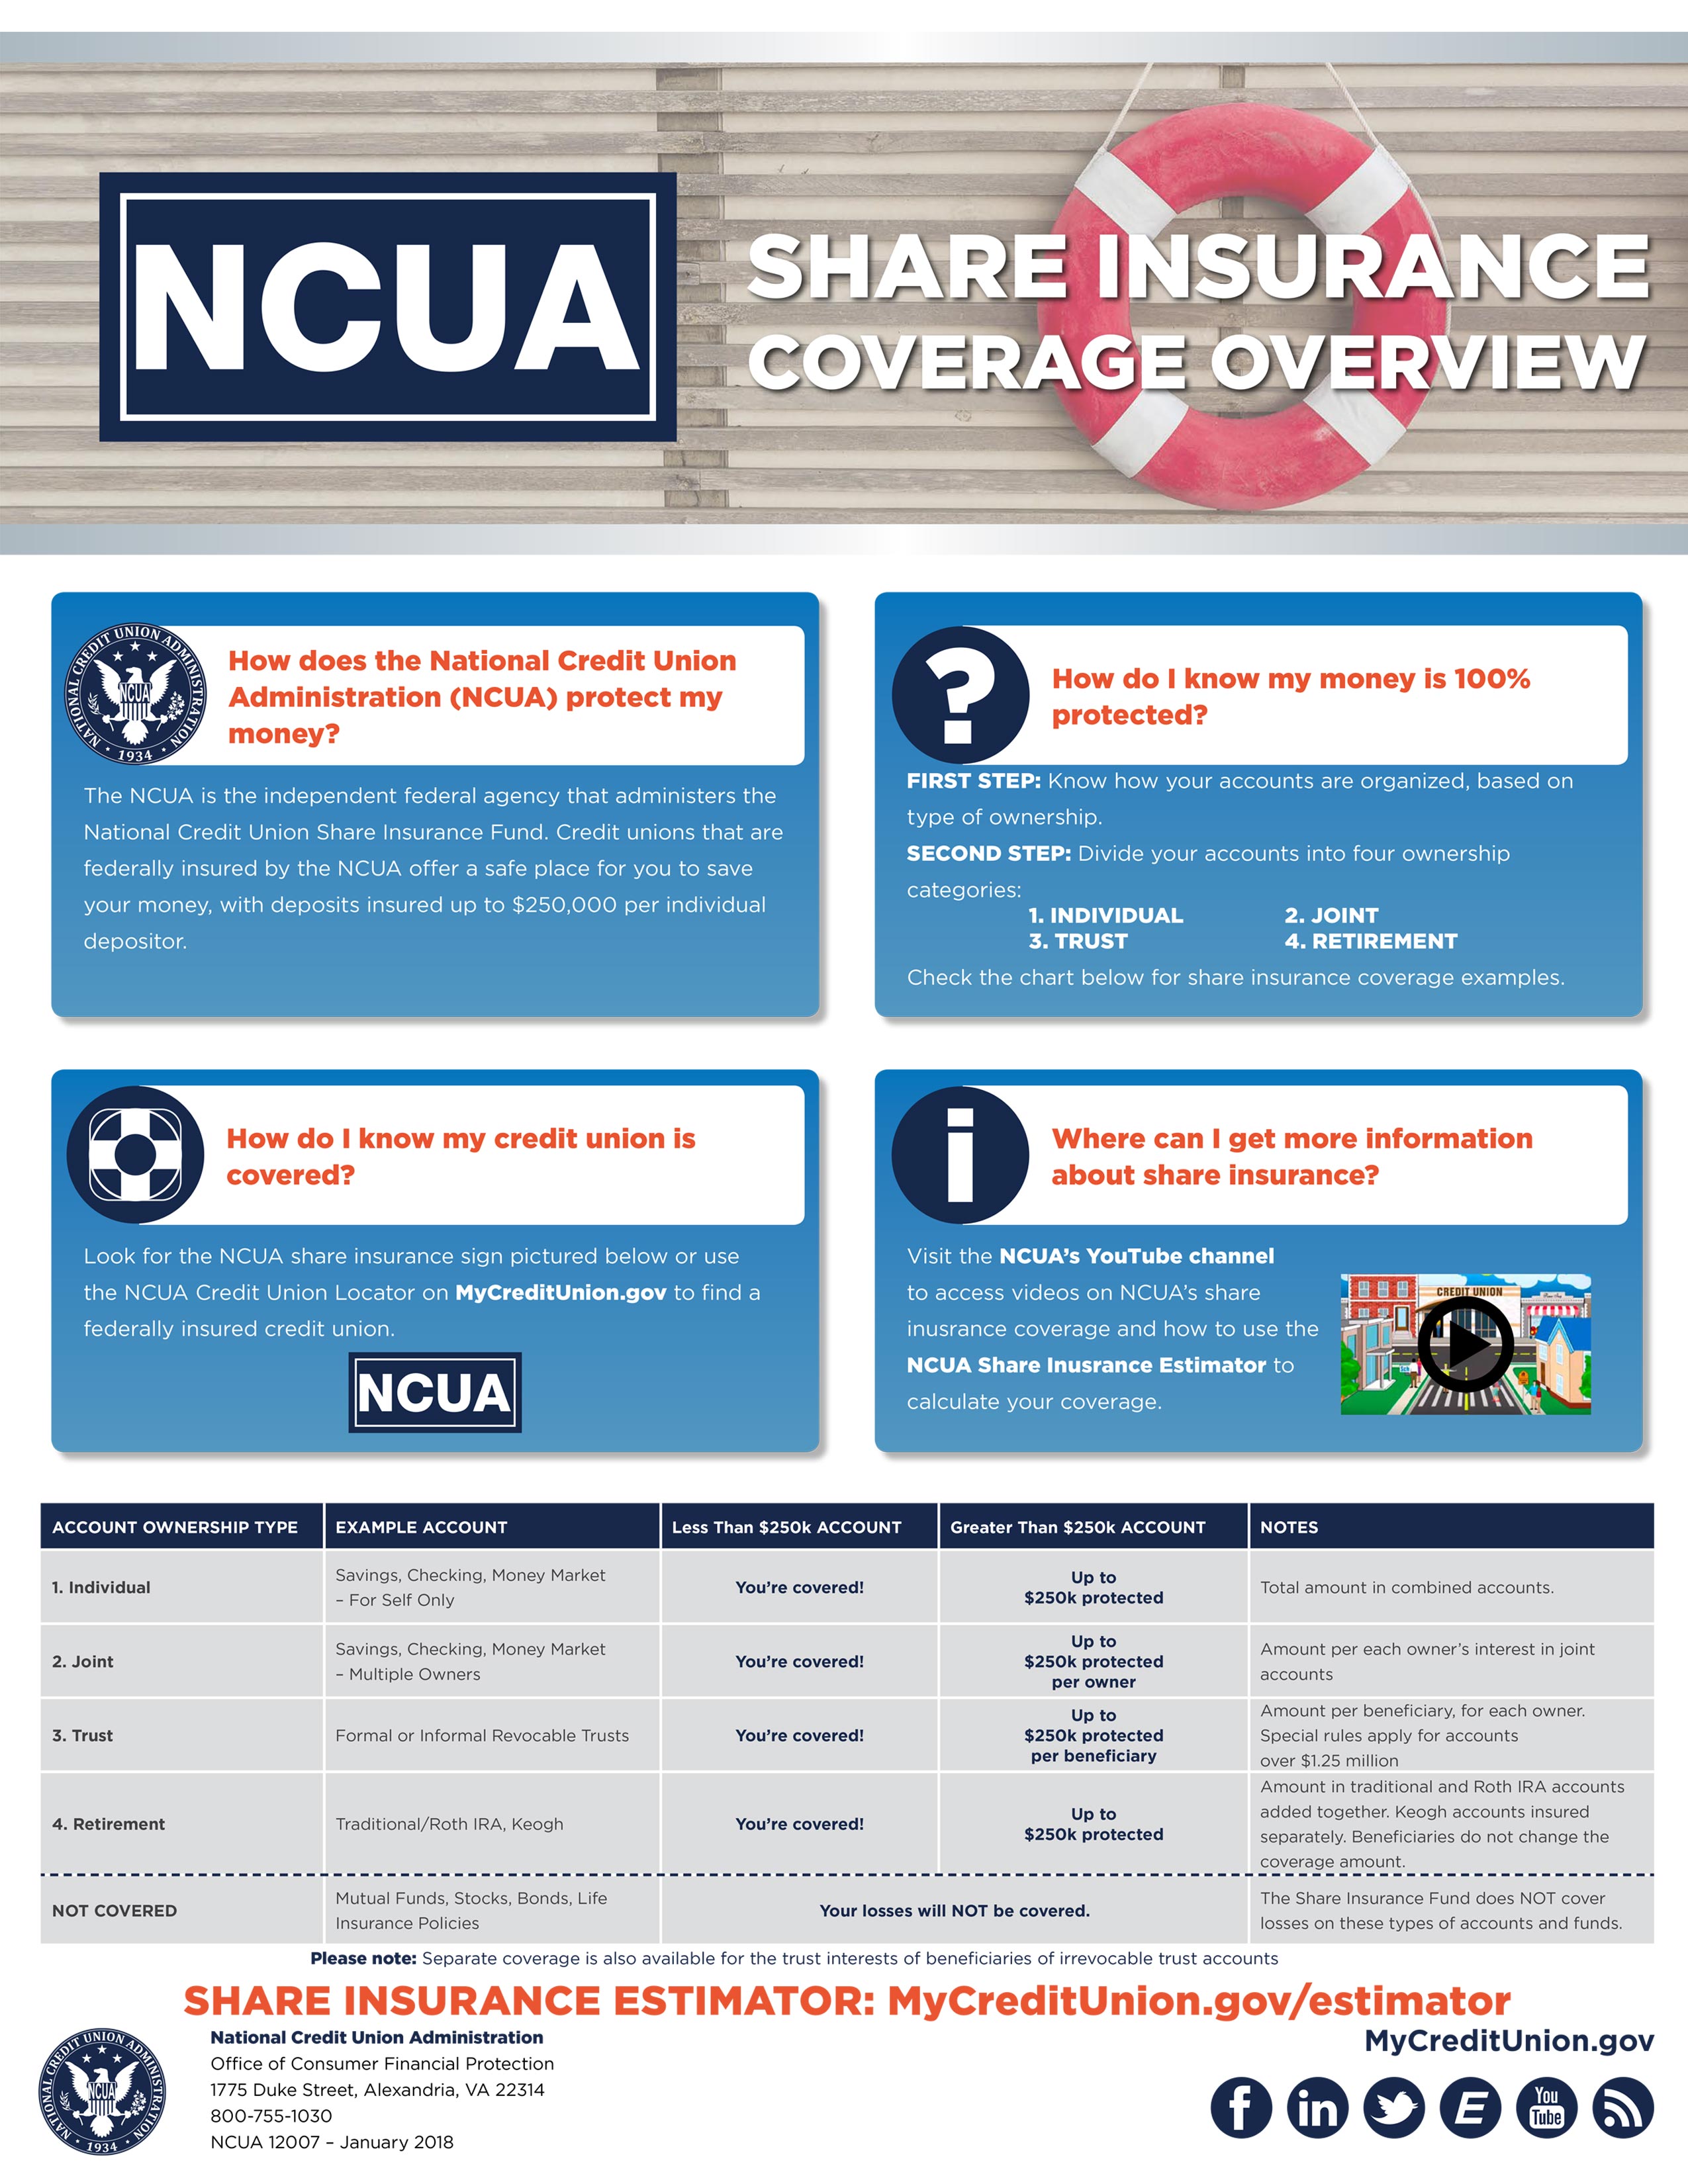 NCUA share insurance coverage overview